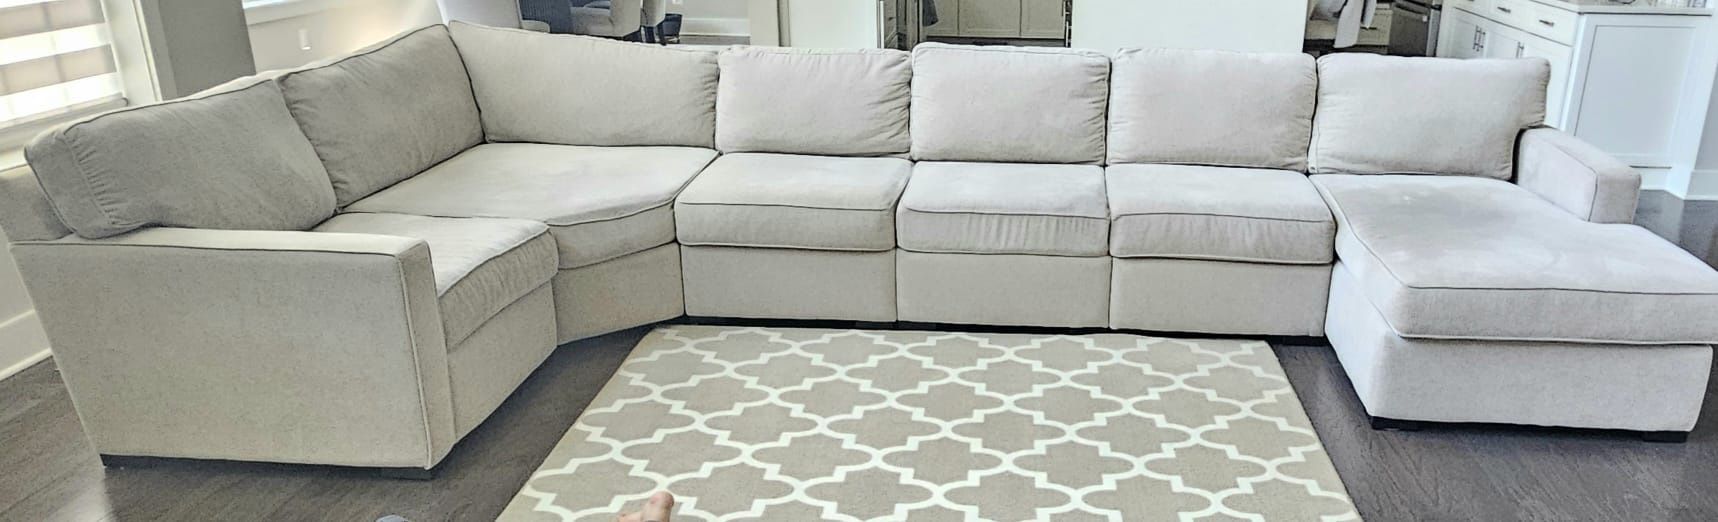 Sofa sectional with Chaise